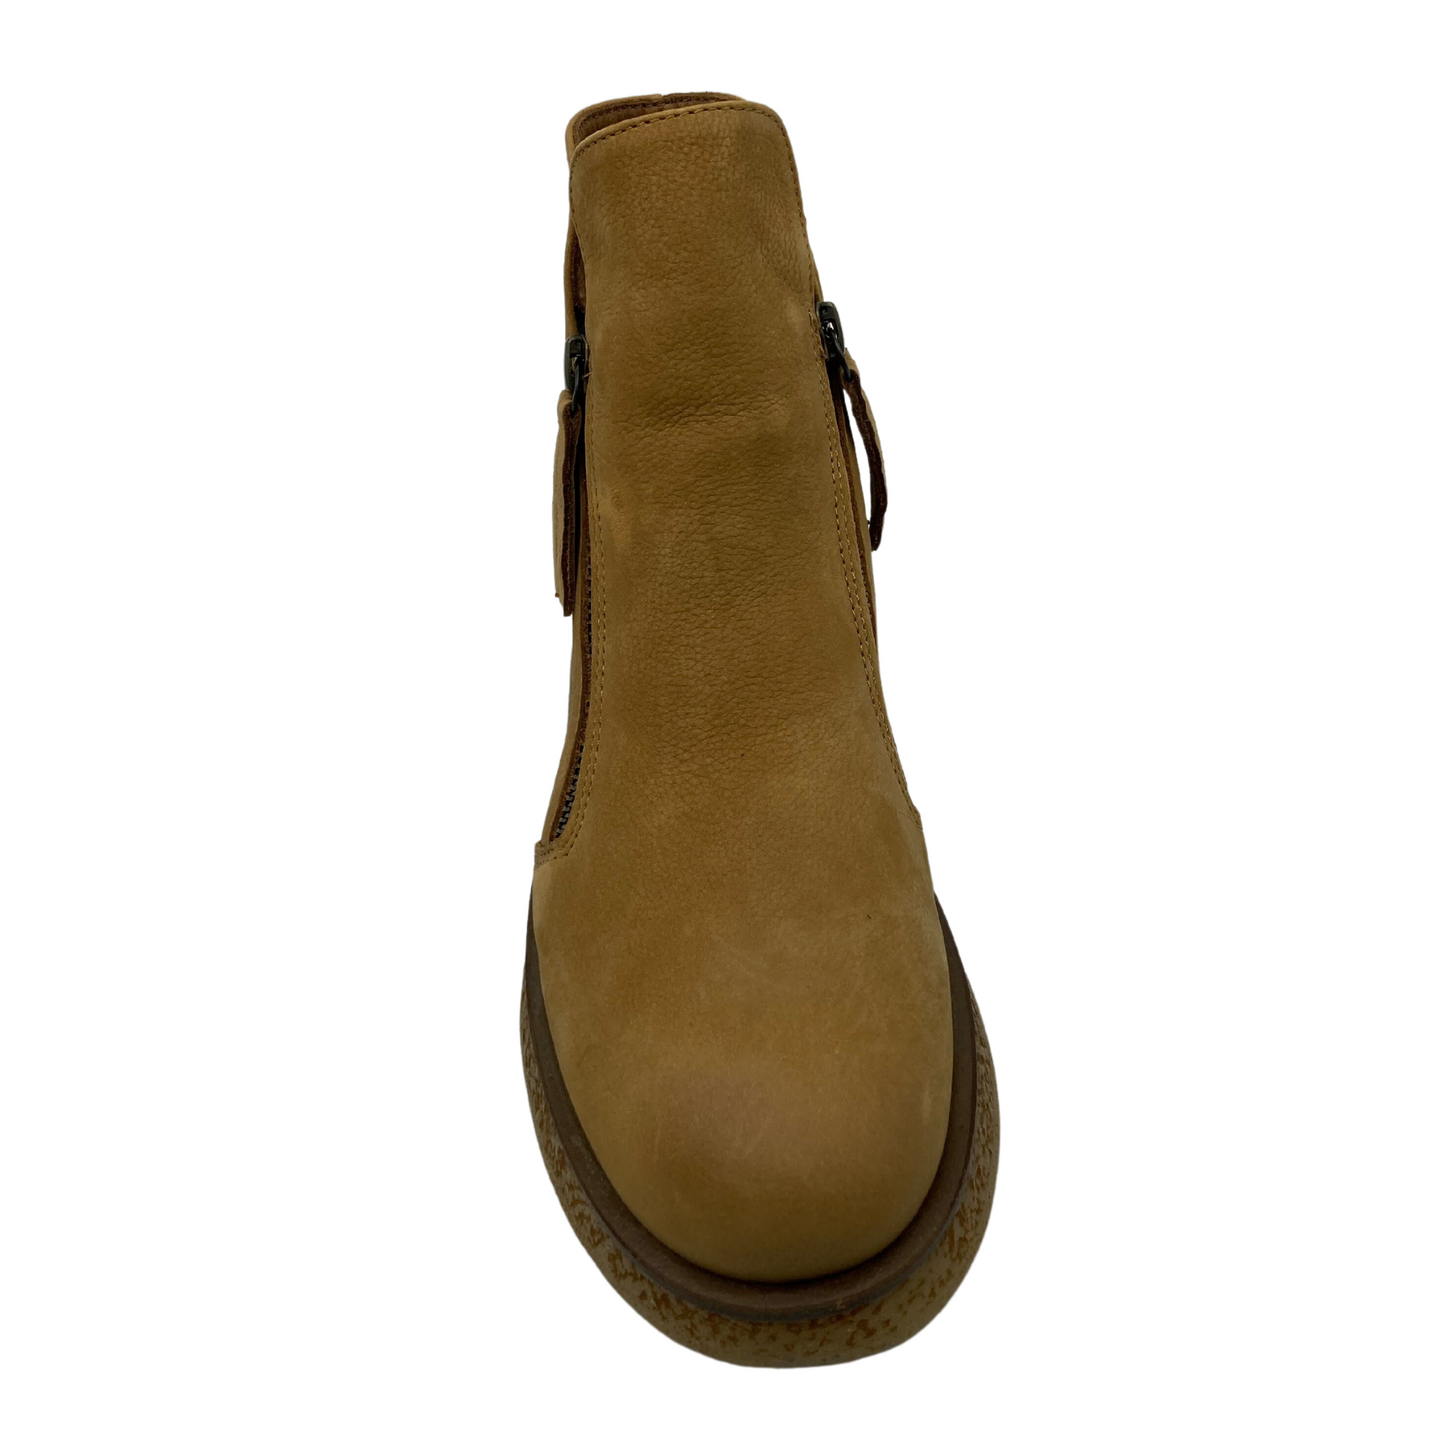 Top view of desert nubuck short boot with double zipper side closures and rounded toe